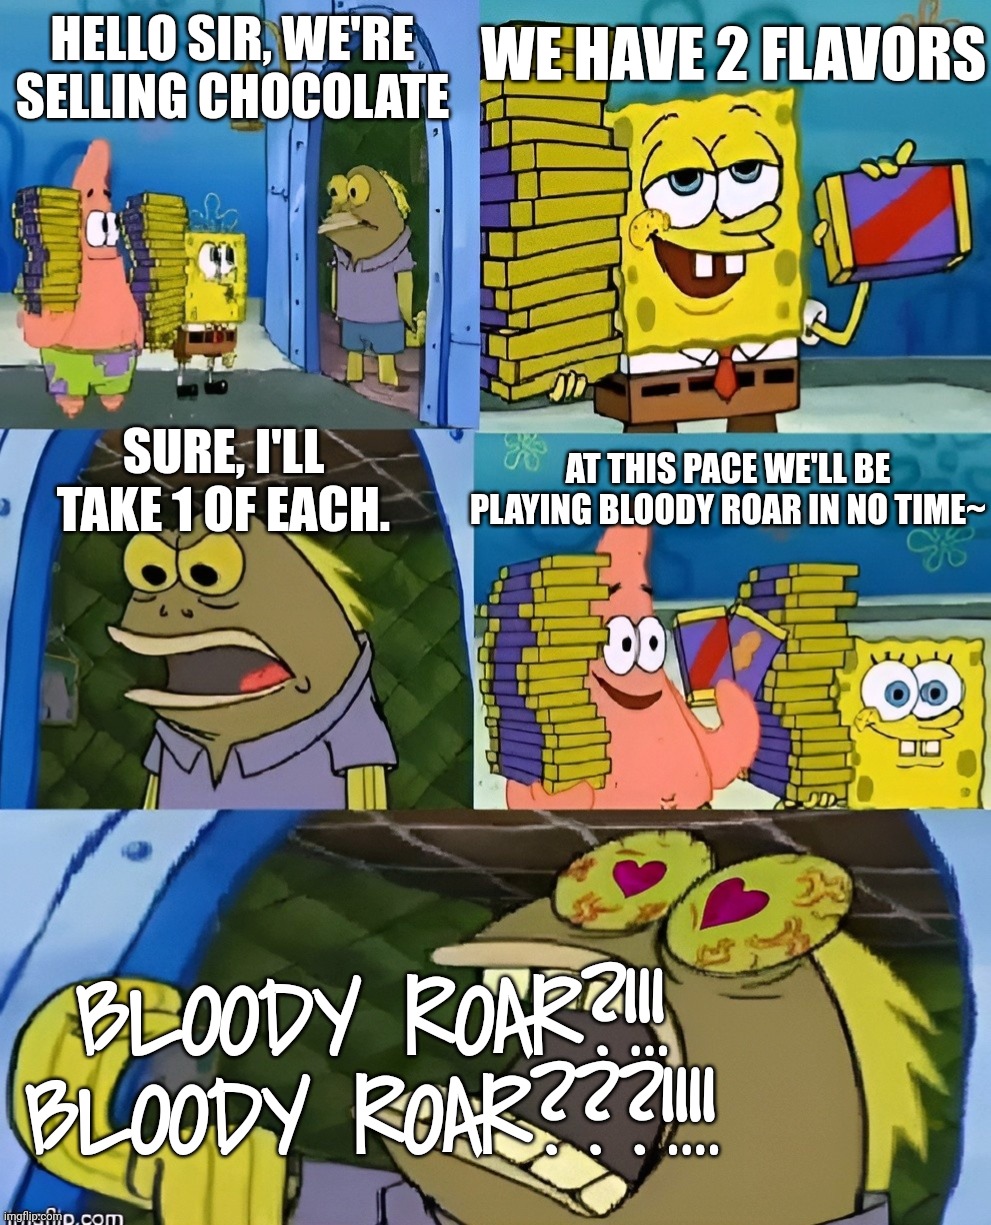 Bloody Roar (Favorite Game) | WE HAVE 2 FLAVORS; HELLO SIR, WE'RE SELLING CHOCOLATE; SURE, I'LL TAKE 1 OF EACH. AT THIS PACE WE'LL BE PLAYING BLOODY ROAR IN NO TIME~; BLOODY ROAR?!!! BLOODY ROAR???!!!! | image tagged in spongebob i'll have you know,obsessed,video games,funny memes | made w/ Imgflip meme maker